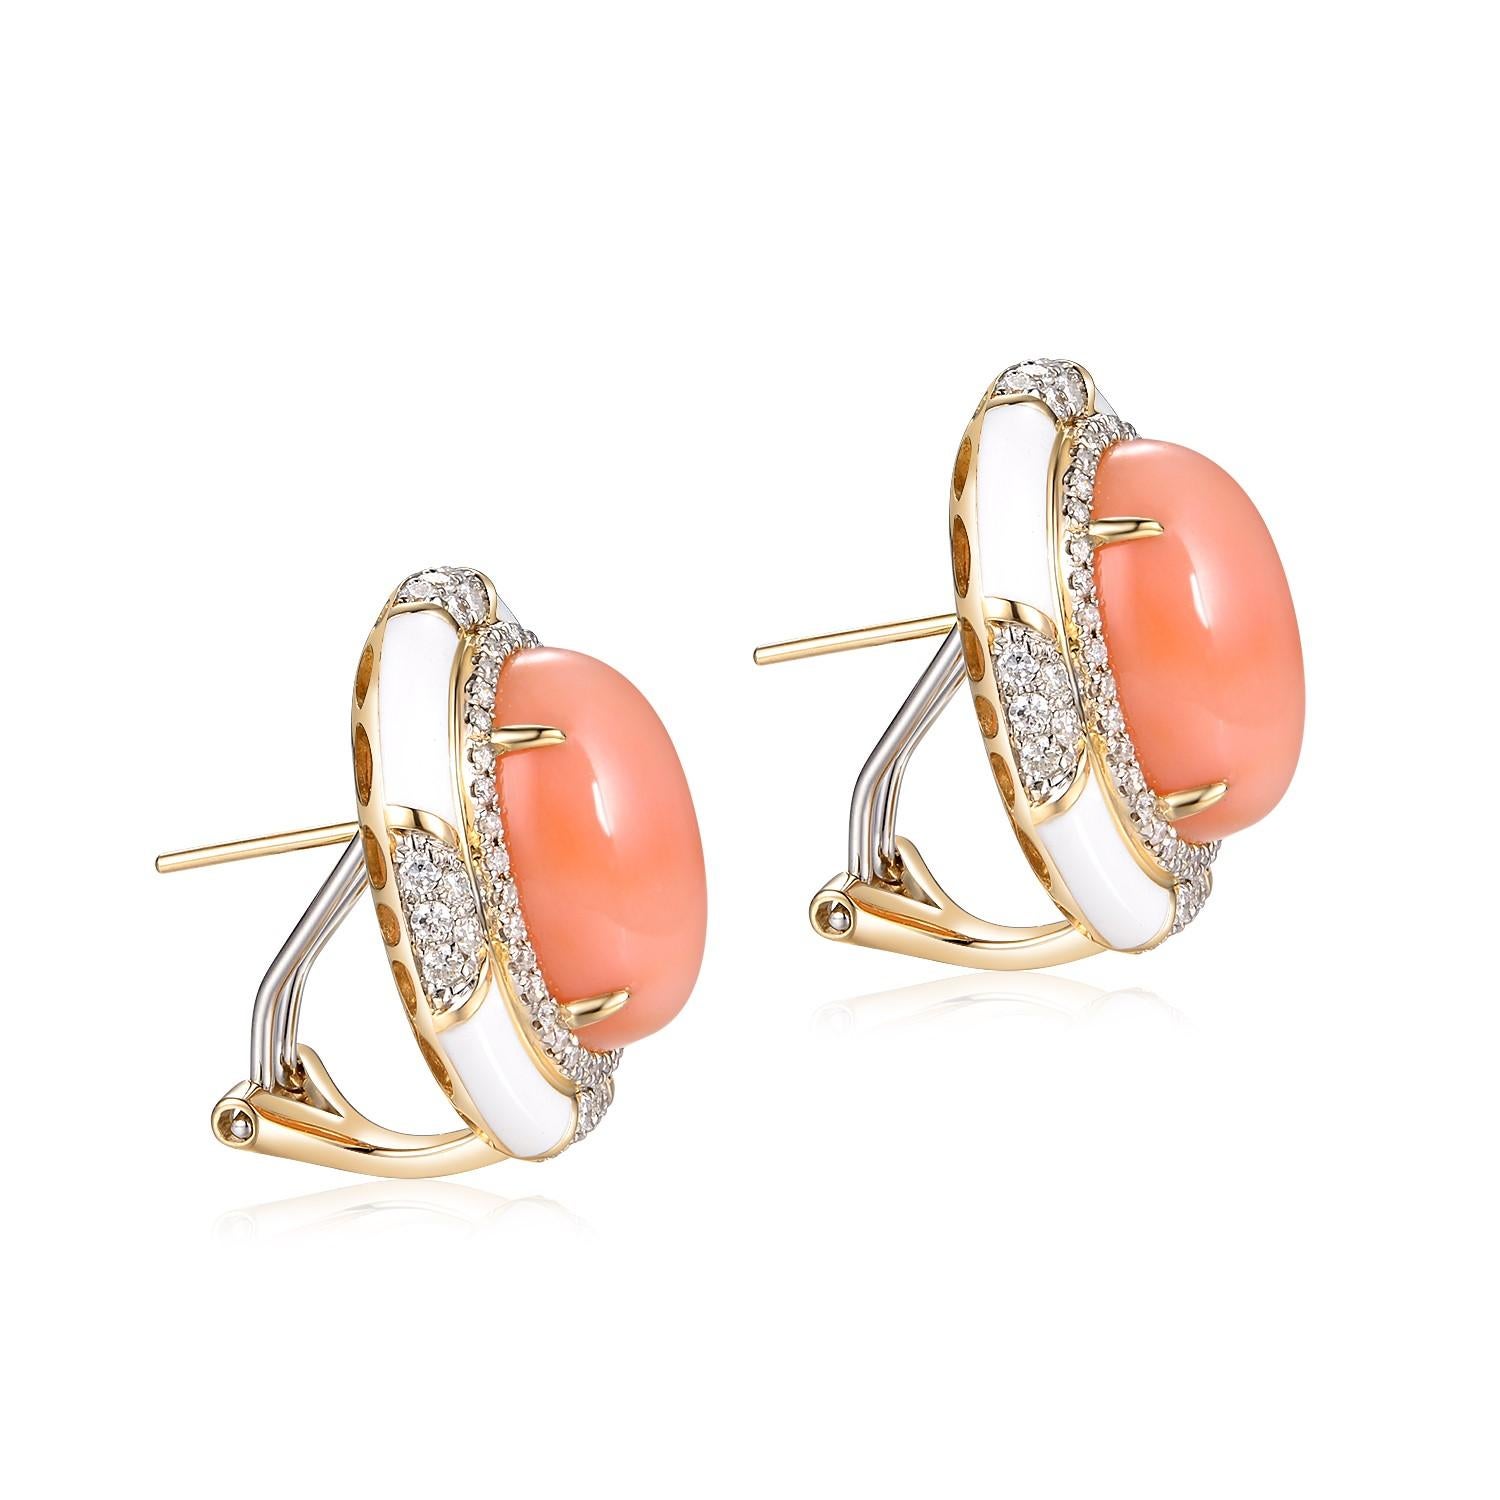 The alluring charm of coral, a gift from the heart of the ocean, takes a radiant form in these exquisite earrings. A perfect union of nature's artistry and human craftsmanship, these earrings exude a refined elegance that speaks volumes about the